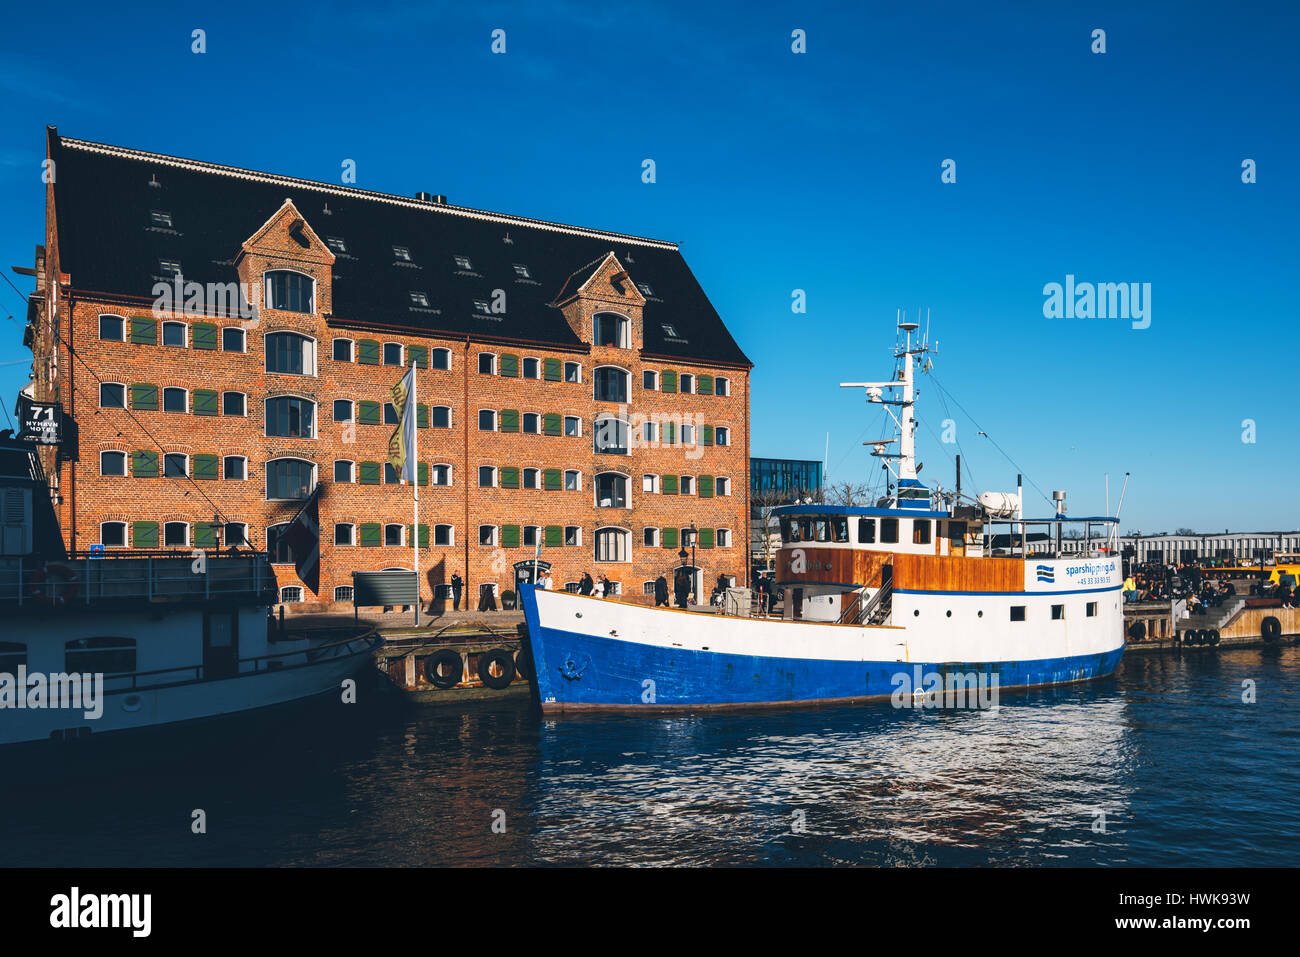 COPENHAGEN, DENMARK - MARCH 11, 2017: Copenhagen Denmark typical architecture. Picture is depicting 71 Nyhavn Hotel housed in a 200-year-old canalside Stock Photo